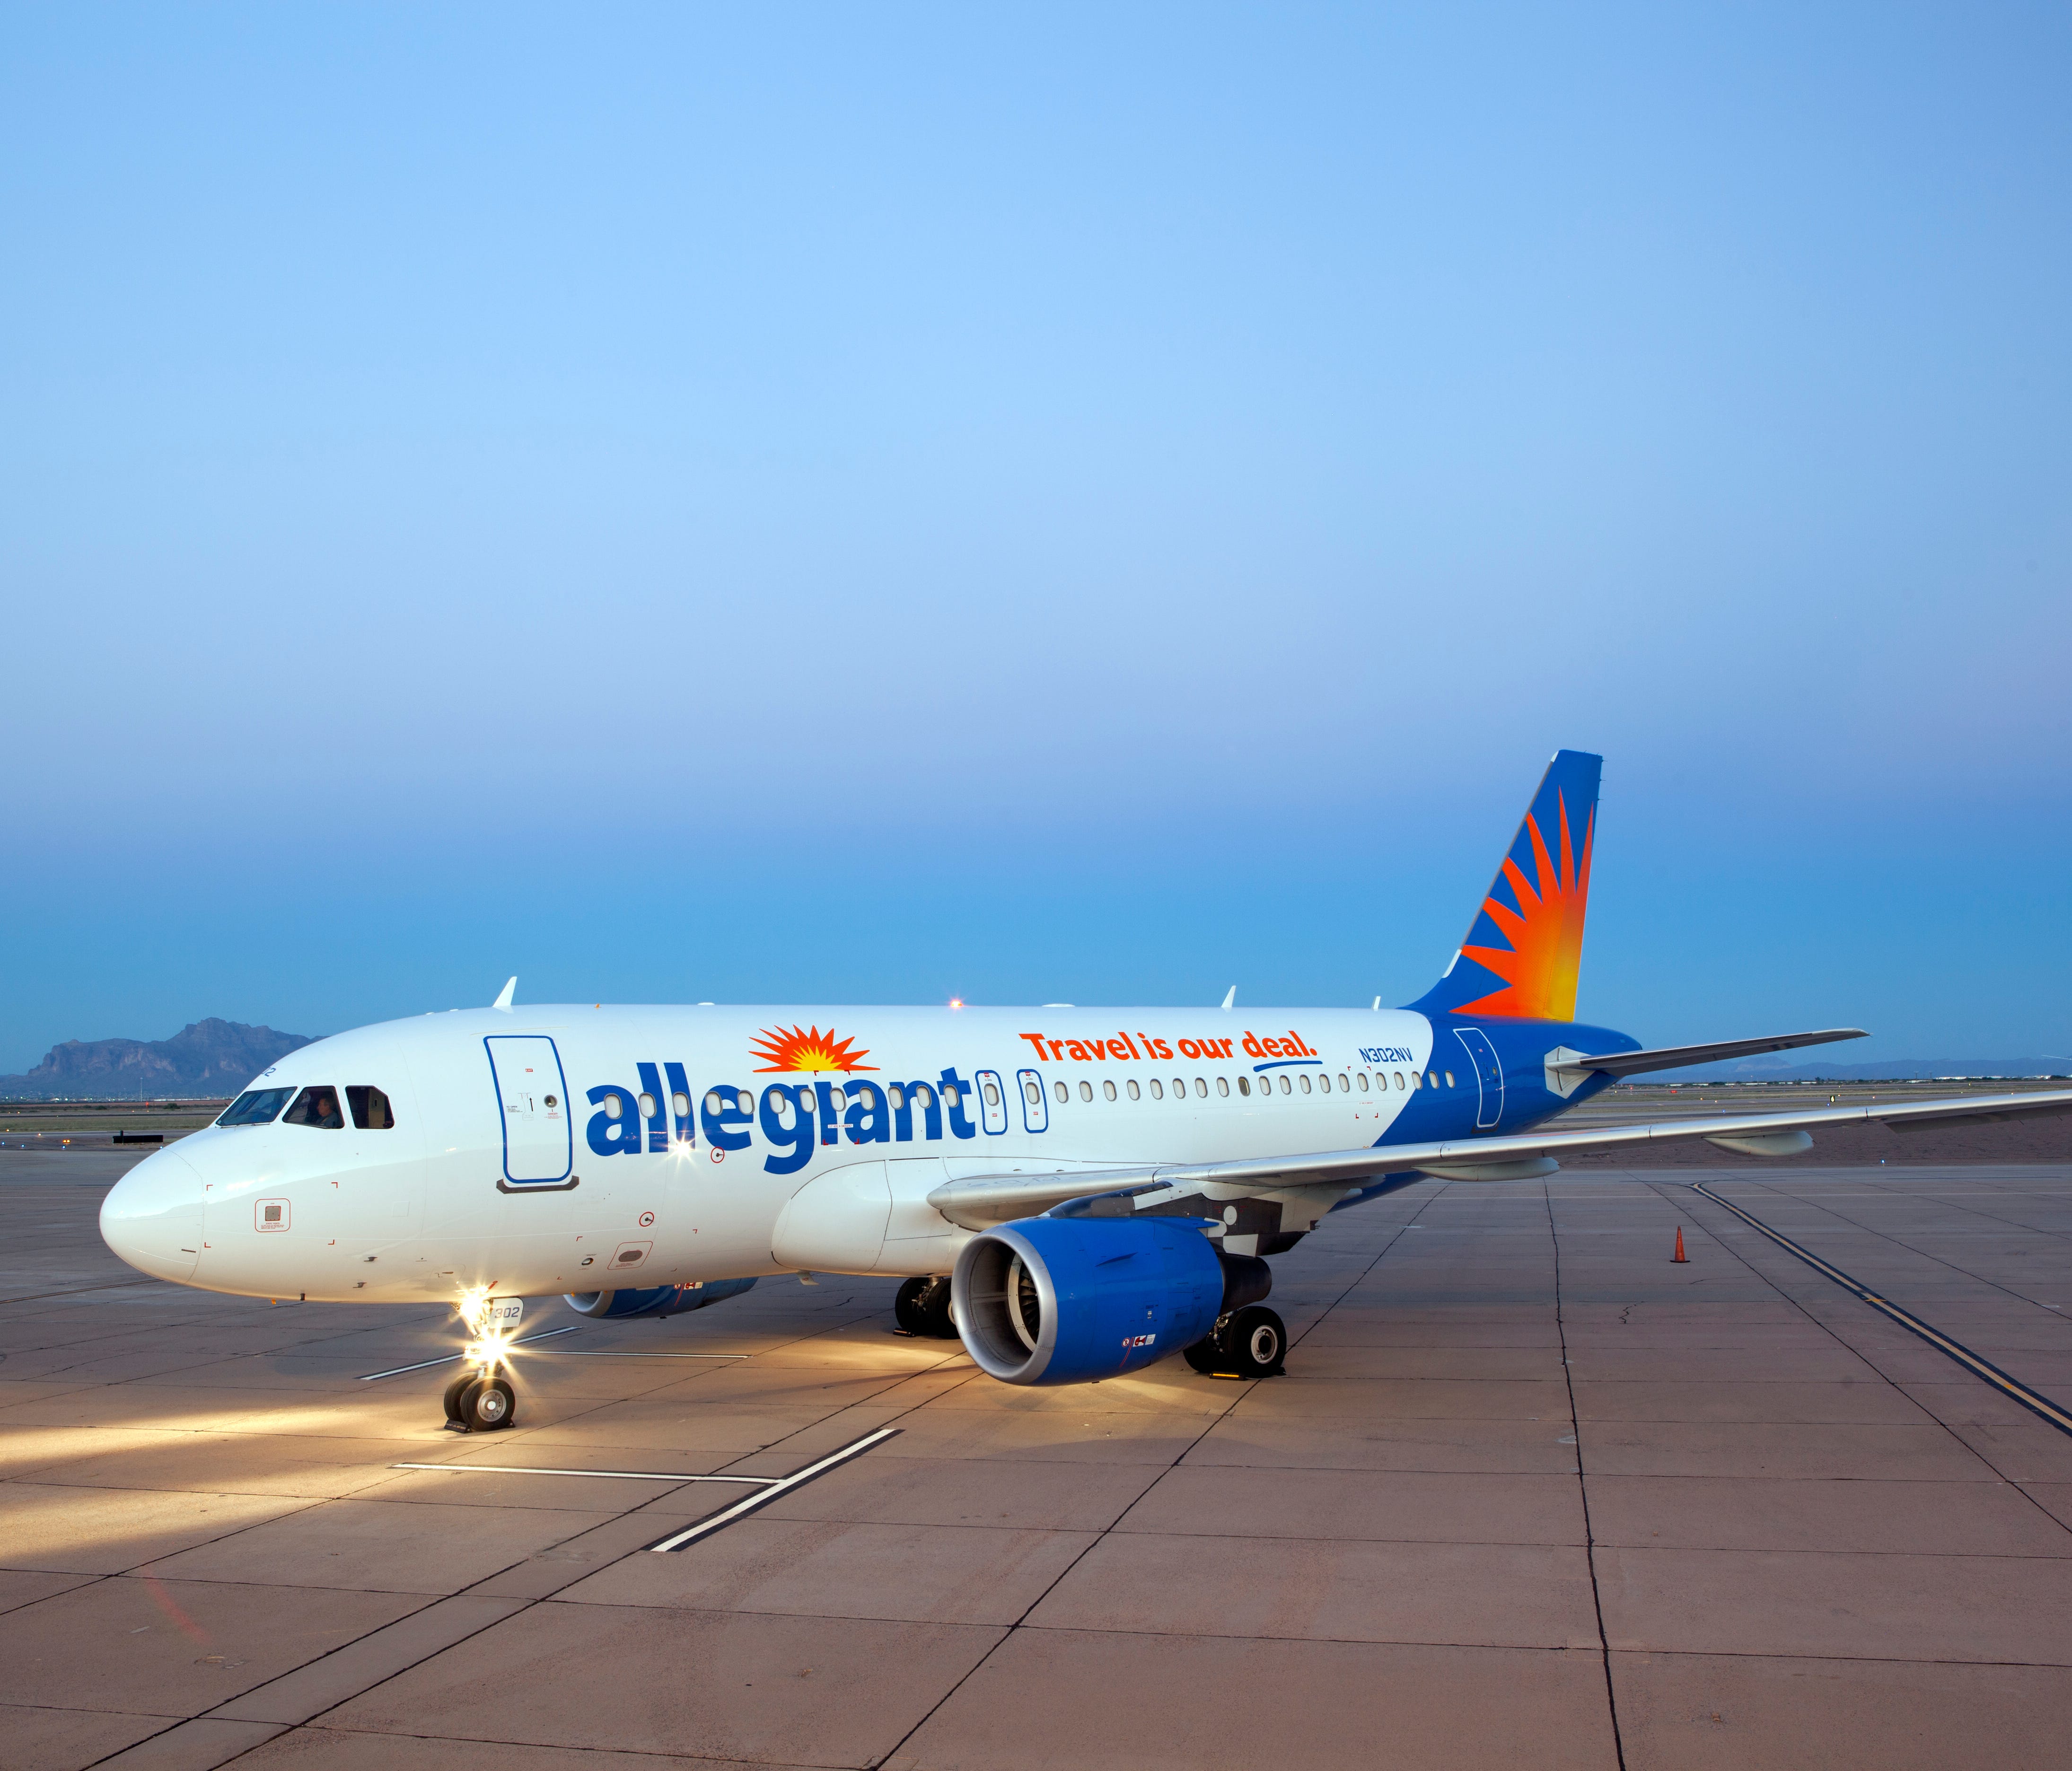 This undated file photo shows an Allegiant Airbus A319 aircraft.